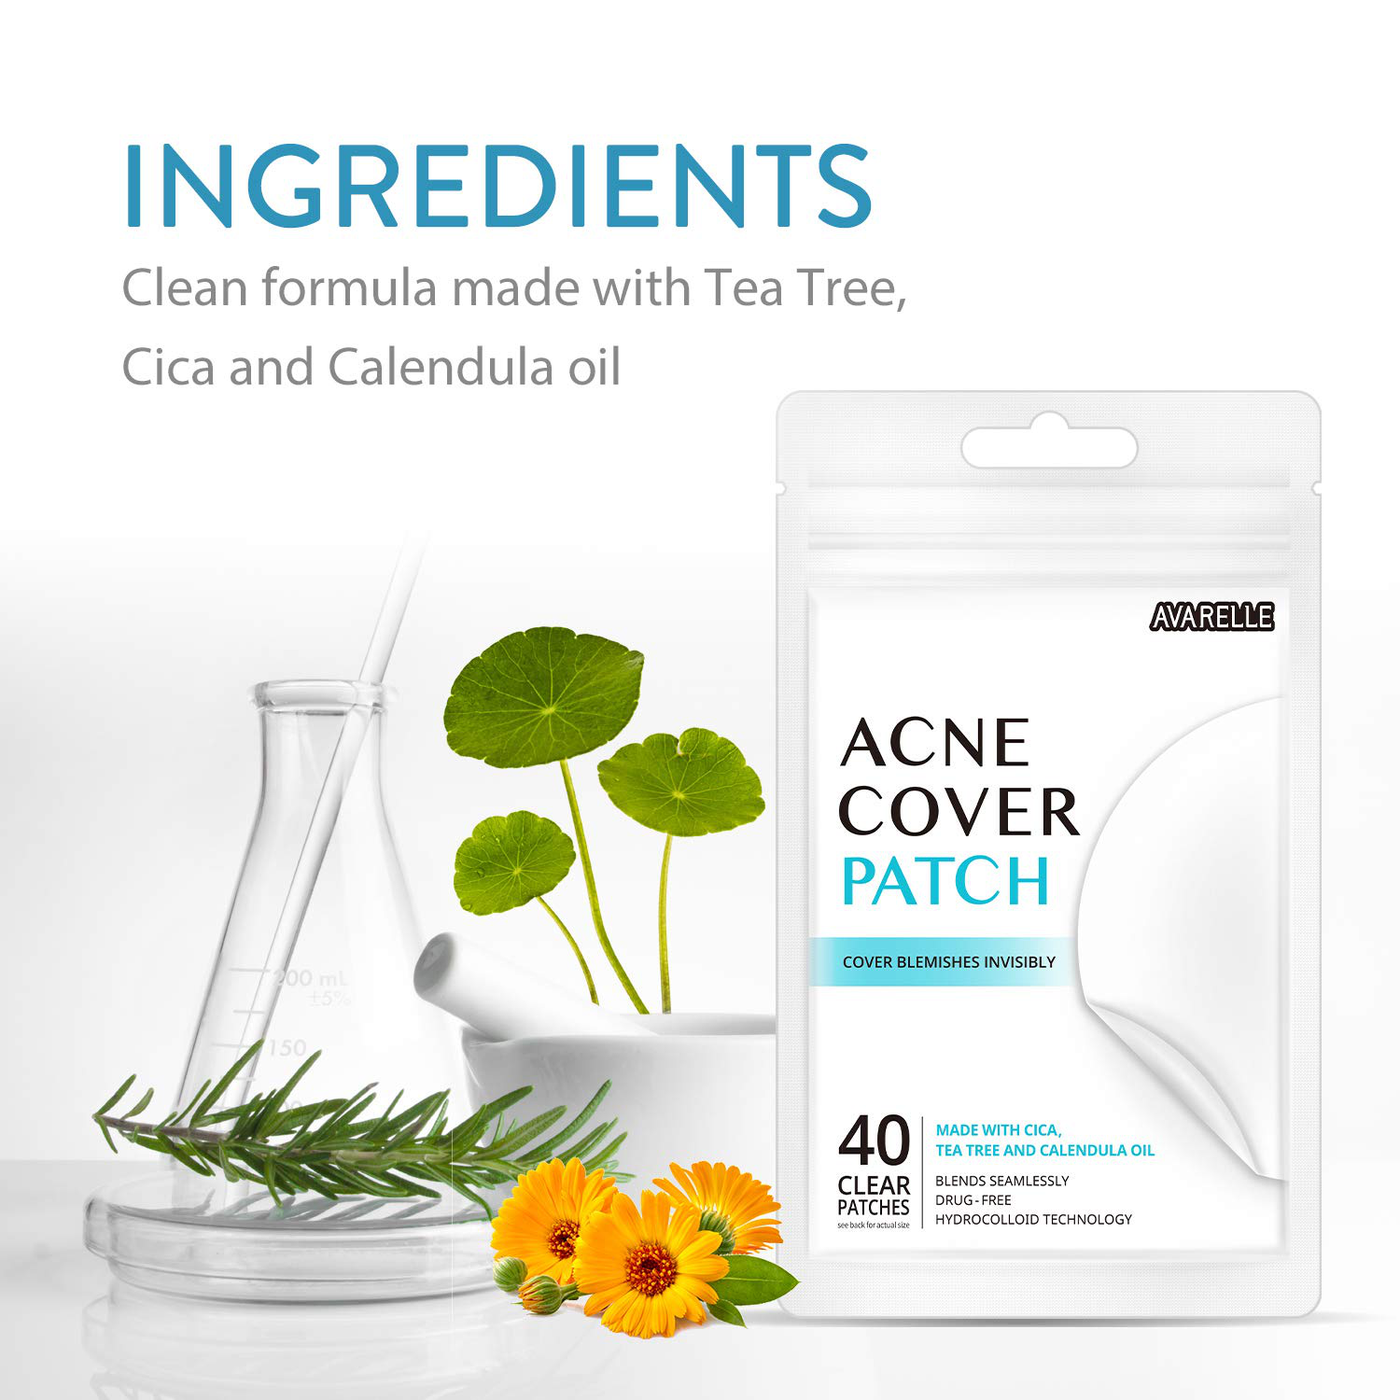 Avarelle Acne Pimple Patch (40 Count) Absorbing Hydrocolloid Spot Treatment with Tea Tree Oil, Calendula Oil and Cica, Certified Vegan, Cruelty Free (ORIGINAL / 40 COUNT)